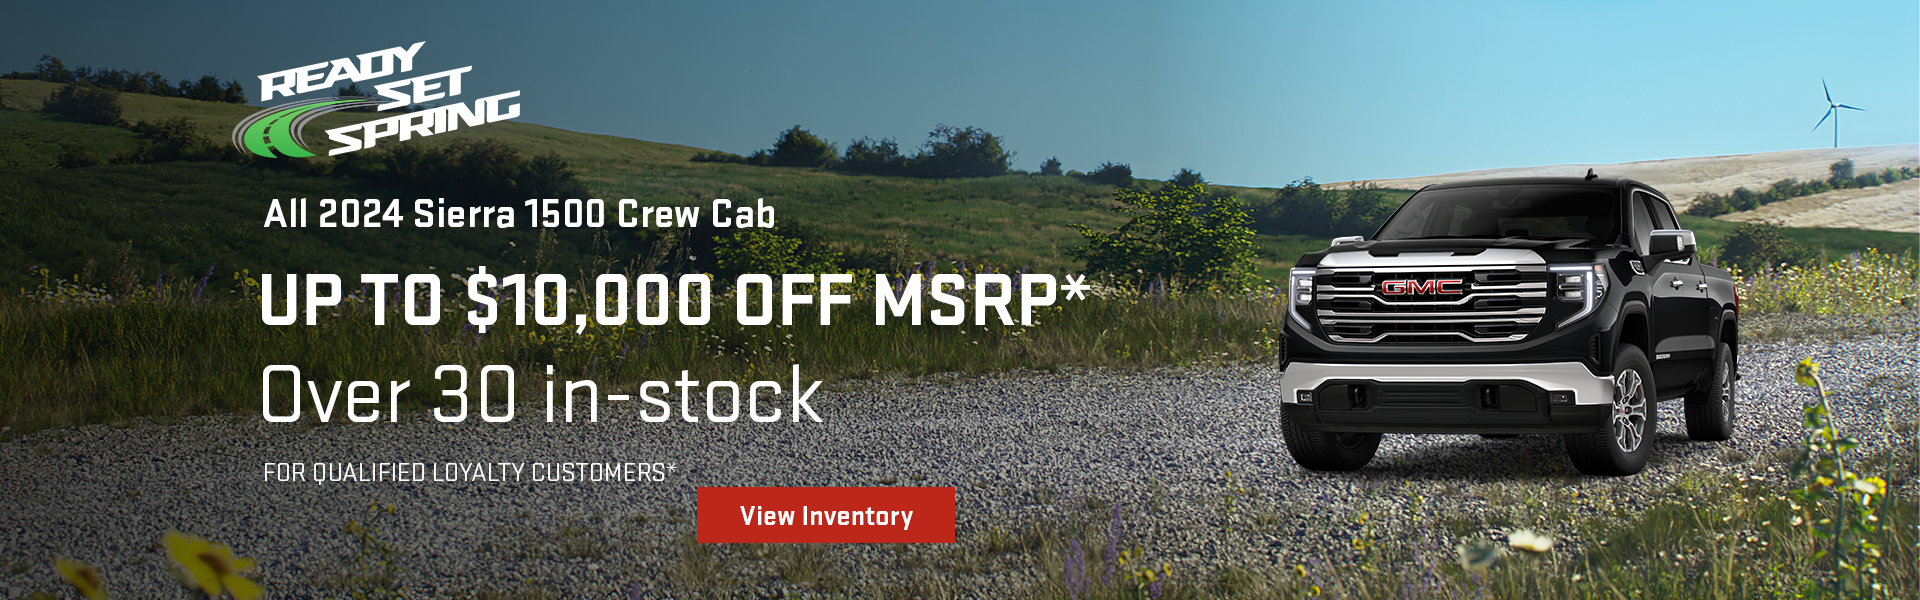 Up to $10,000 Off MSRP* MY24 Sierra 1500 Crew Cab